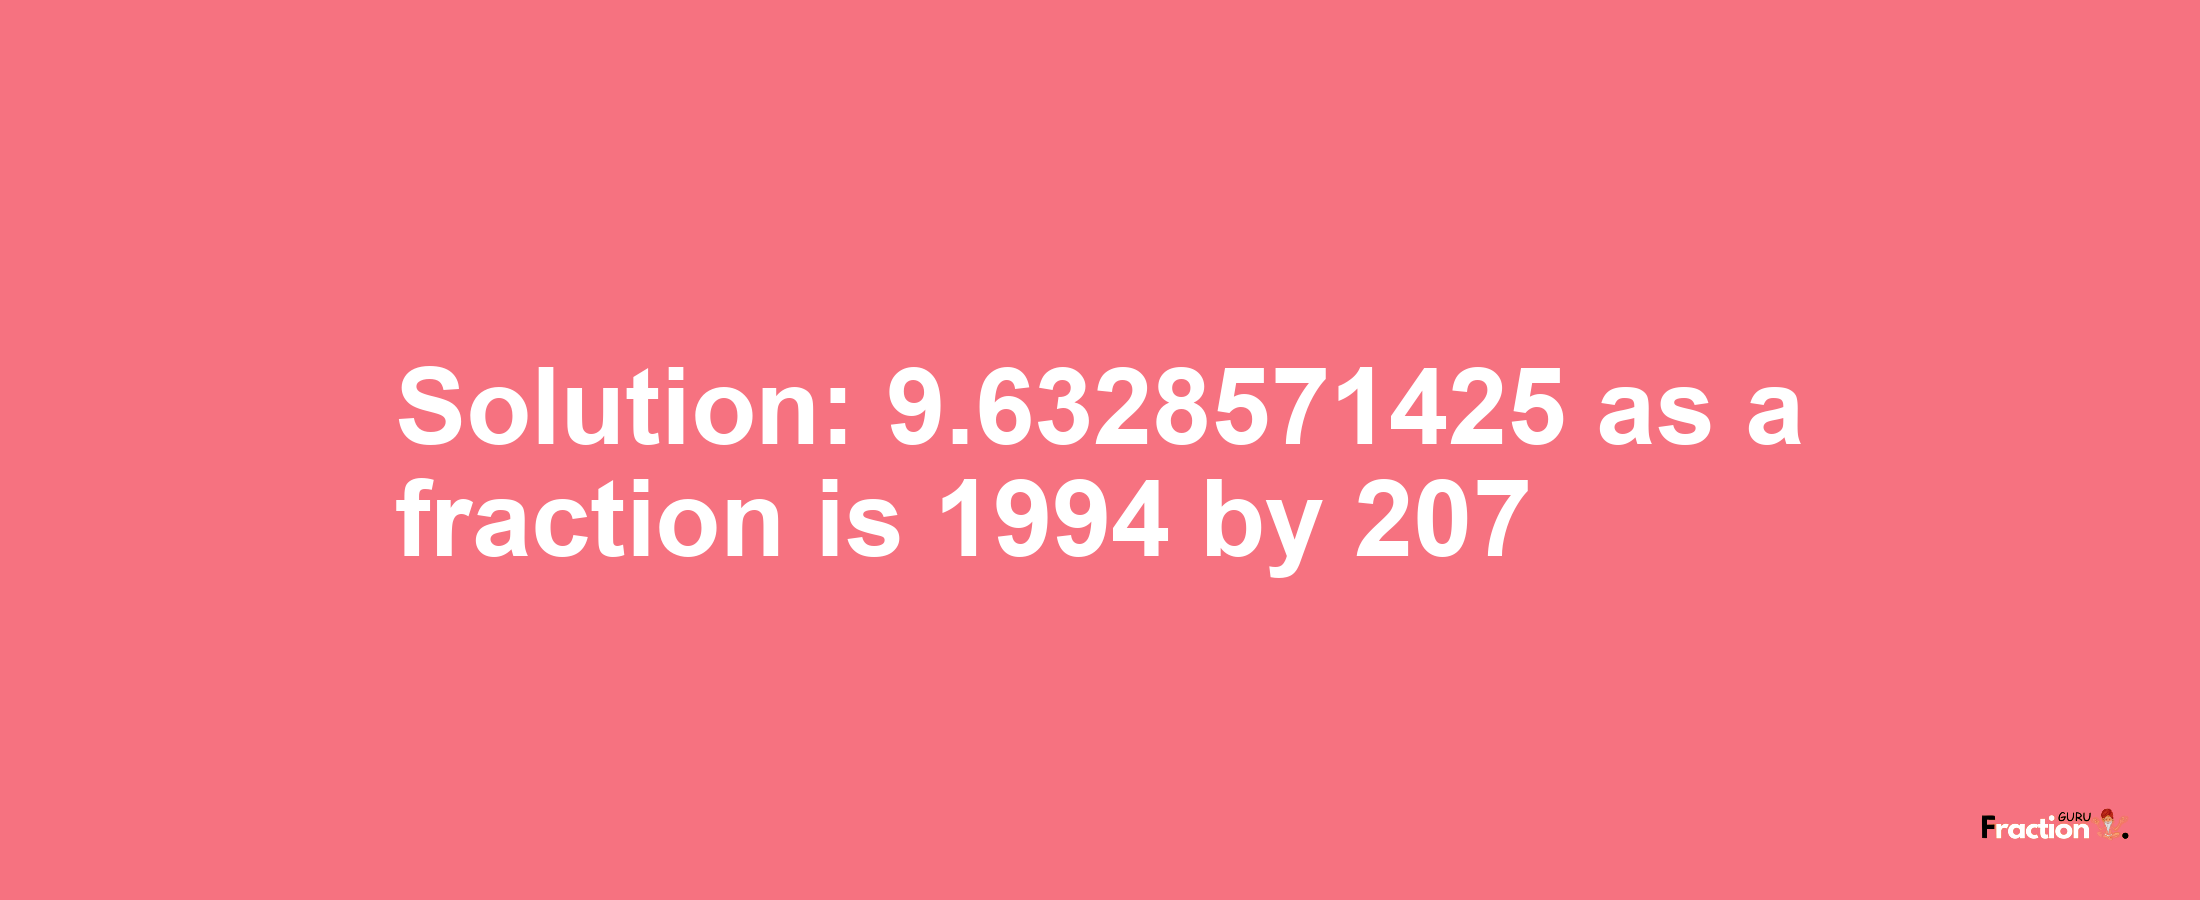 Solution:9.6328571425 as a fraction is 1994/207